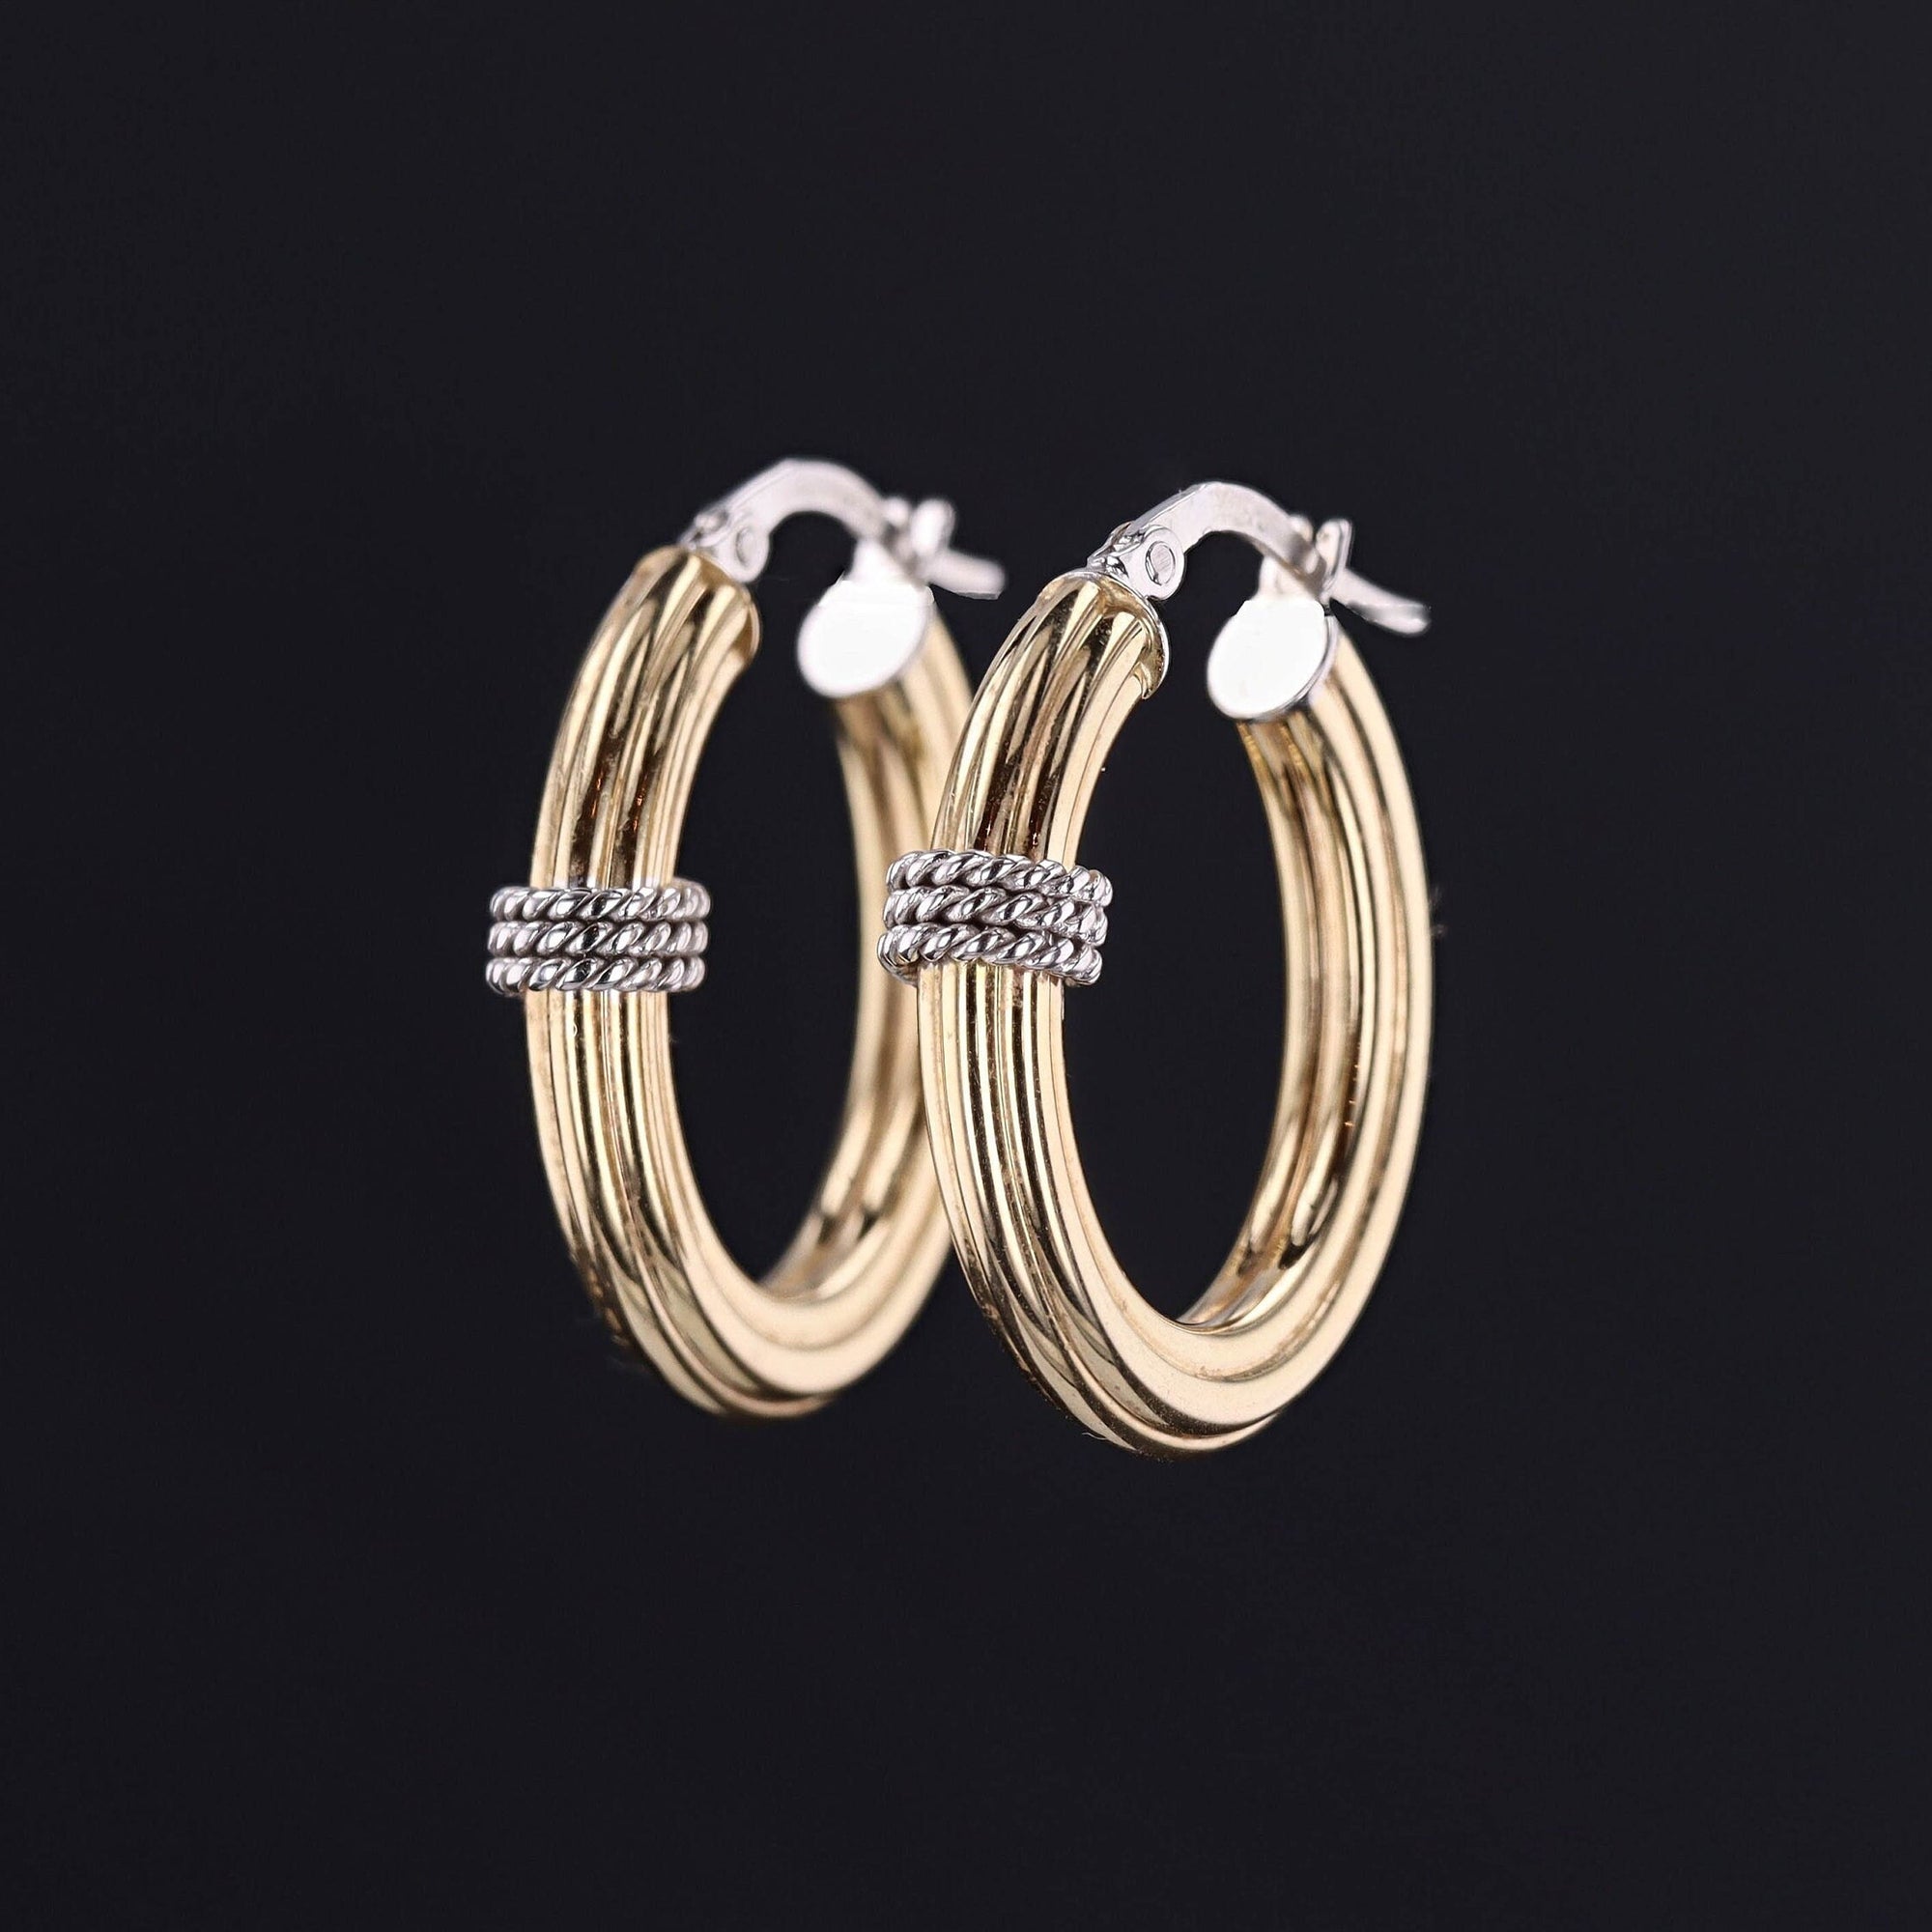 Vintage Hoop Earrings of 14k Yellow and White Gold